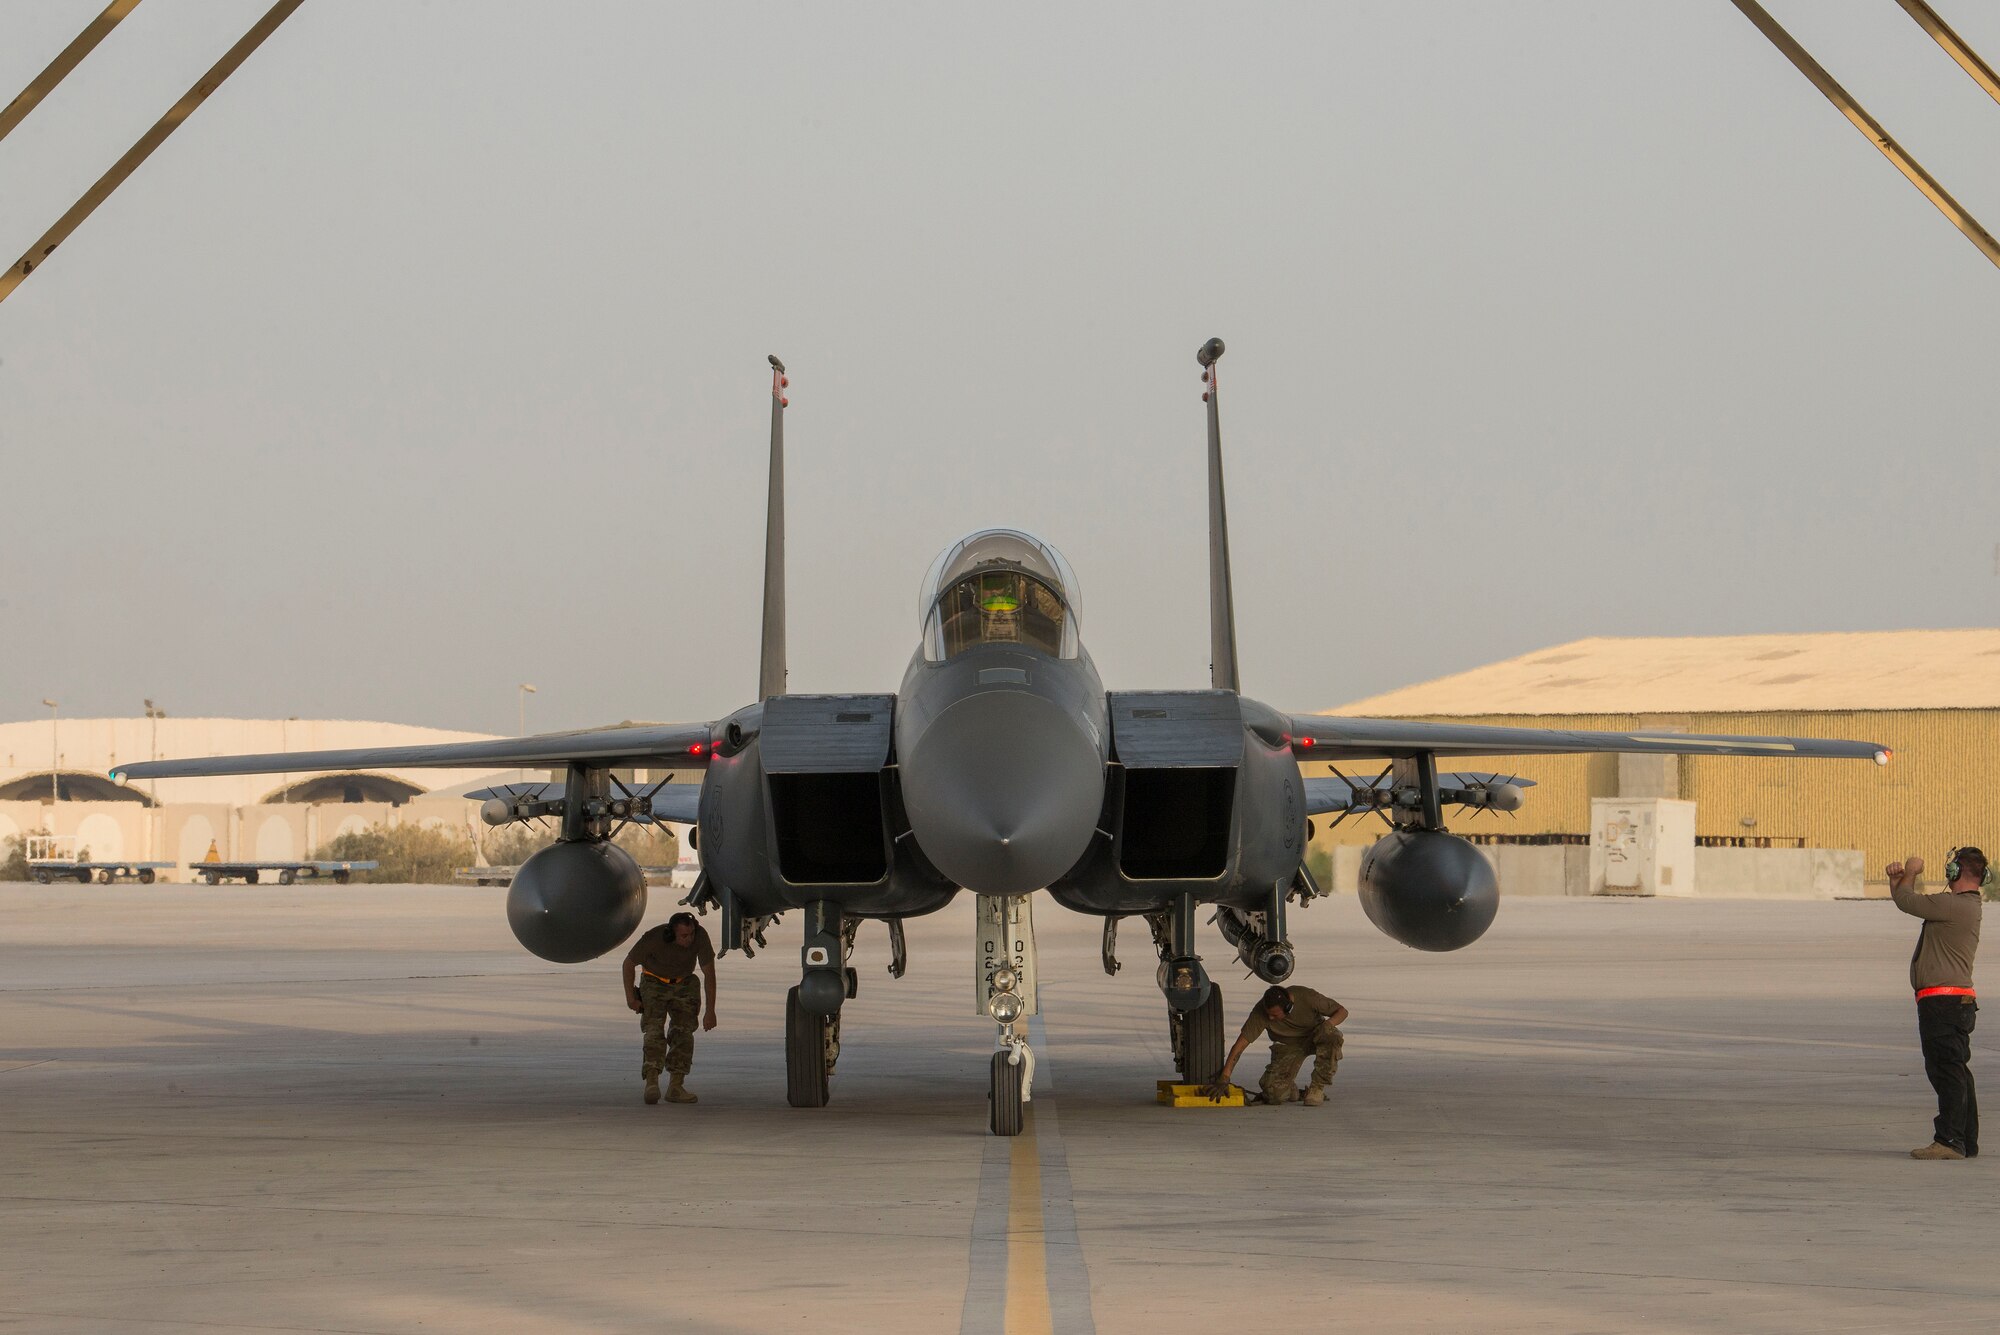 U.S. Airmen assigned to the 332nd Air Expeditionary Wing perform post-flight procedures on a U.S. Air Force F-15E Strike Eagle assigned to the 332nd AEW on the flightline at Al Dhafra Air Base, United Arab Emirates, Nov. 17, 2020.